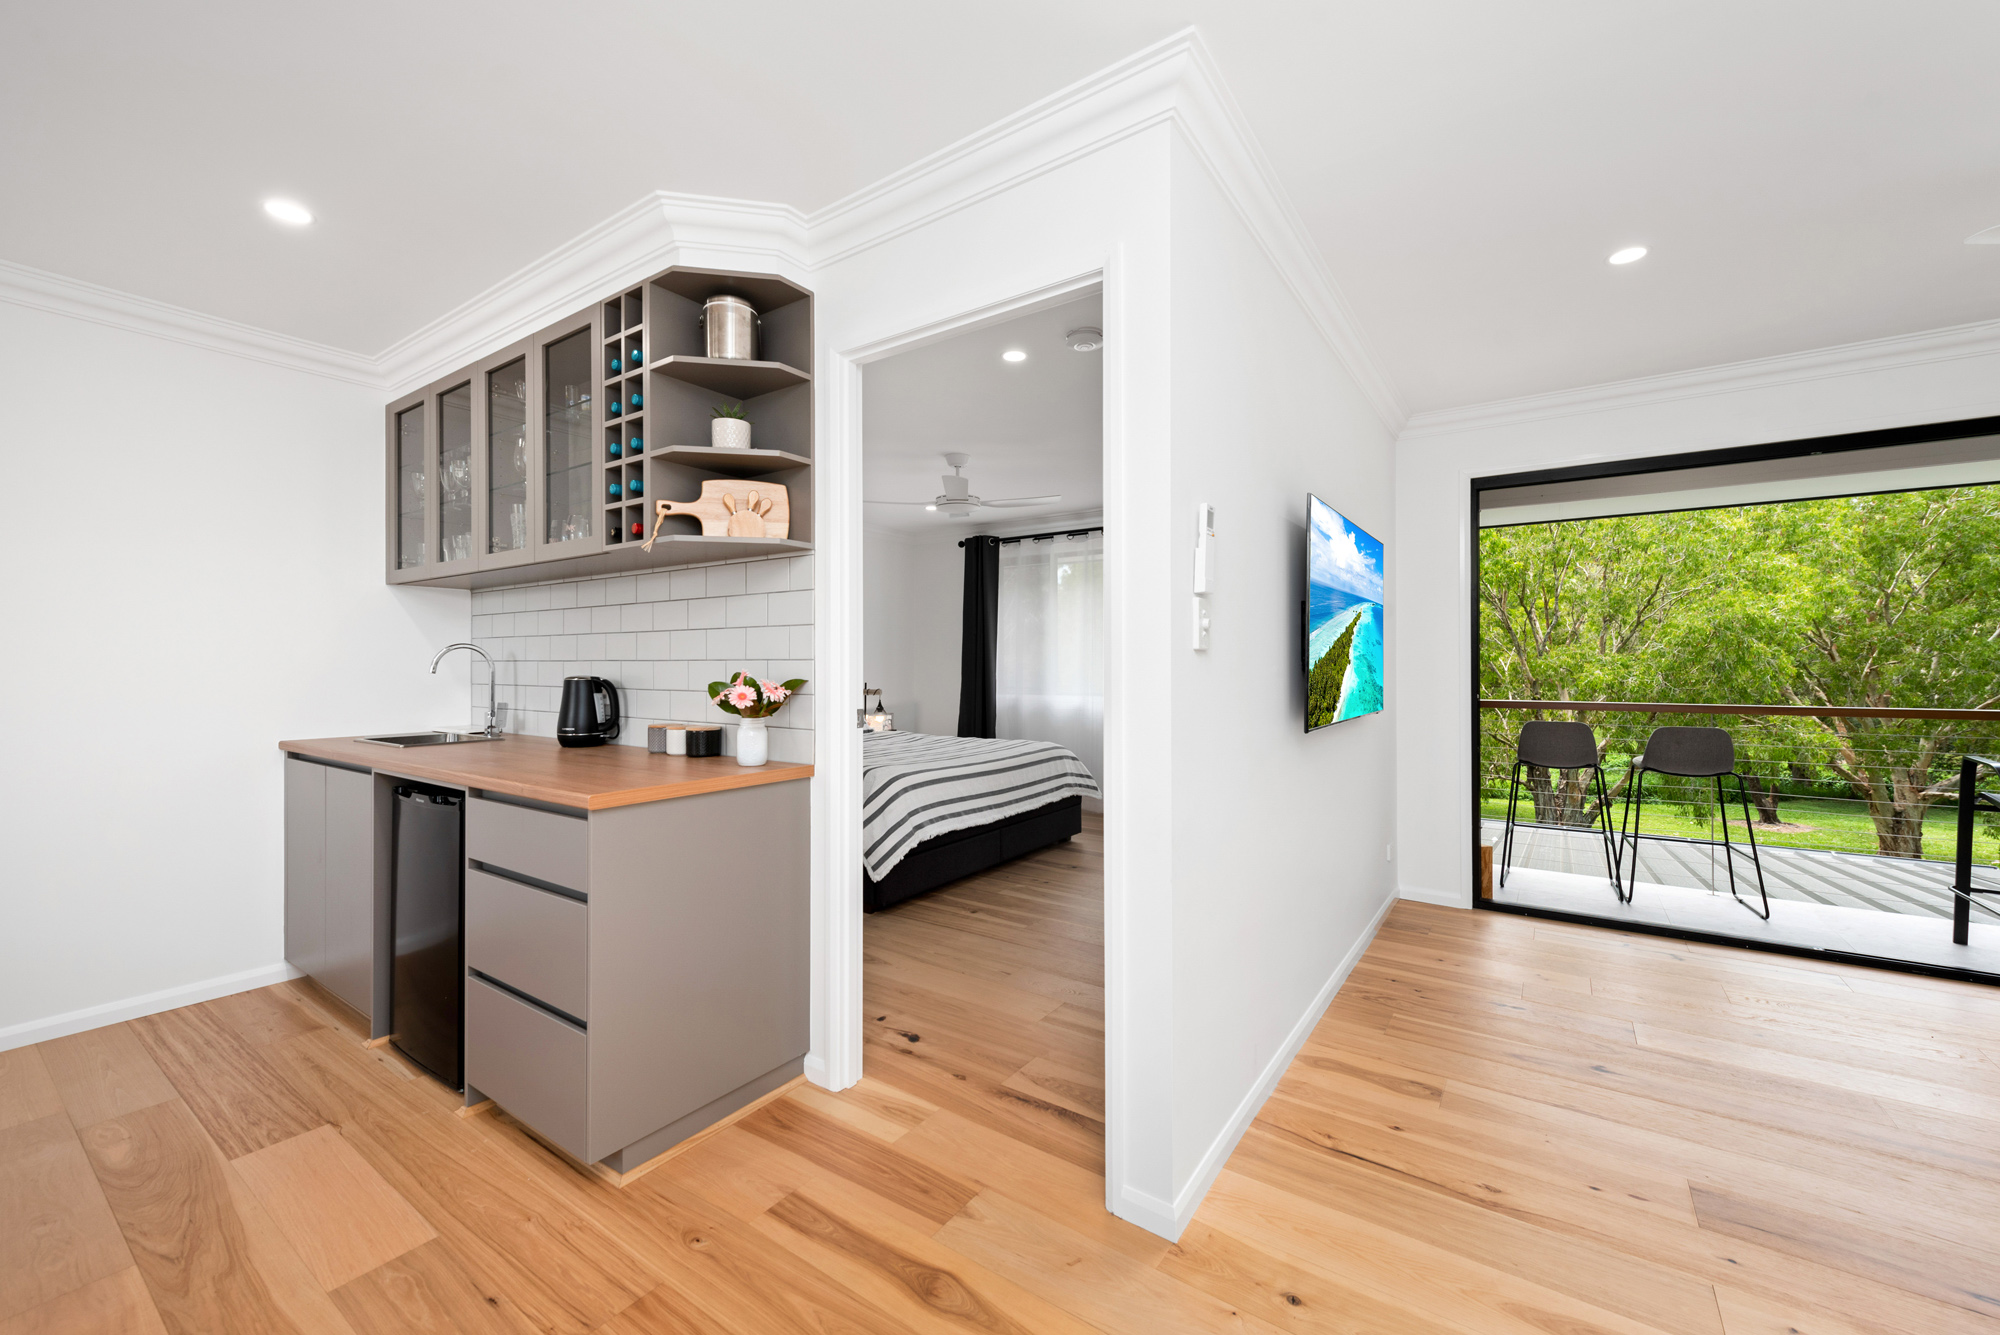 Second storey kitchenette adjoining master bedroom, rumpus and balcony with park views